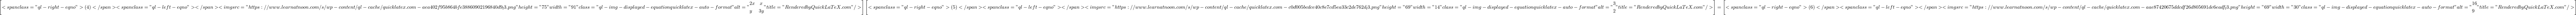 \[\left[ <span class="ql-right-eqno"> (4) </span><span class="ql-left-eqno">   </span><img src="https://www.learnatnoon.com/s/wp-content/ql-cache/quicklatex.com-aea402f95b864bfe38860902196840d9_l3.png" height="75" width="91" class="ql-img-displayed-equation quicklatex-auto-format" alt="\begin{align*}   & 2x\,\,\,\,\,\,x \\   & y\,\,\,\,\,\,\,\,3y \\  \end{align*}" title="Rendered by QuickLaTeX.com"/> \right]\left[ <span class="ql-right-eqno"> (5) </span><span class="ql-left-eqno">   </span><img src="https://www.learnatnoon.com/s/wp-content/ql-cache/quicklatex.com-c0d005bcdce40c8e7cd5ea33c2de762d_l3.png" height="69" width="14" class="ql-img-displayed-equation quicklatex-auto-format" alt="\begin{align*}   & 3 \\   & 2 \\  \end{align*}" title="Rendered by QuickLaTeX.com"/> \right]=\left[ <span class="ql-right-eqno"> (6) </span><span class="ql-left-eqno">   </span><img src="https://www.learnatnoon.com/s/wp-content/ql-cache/quicklatex.com-aae87420675ddcdf26d805691de6eadf_l3.png" height="69" width="30" class="ql-img-displayed-equation quicklatex-auto-format" alt="\begin{align*}   & 16 \\   & 9 \\  \end{align*}" title="Rendered by QuickLaTeX.com"/> \right]\]